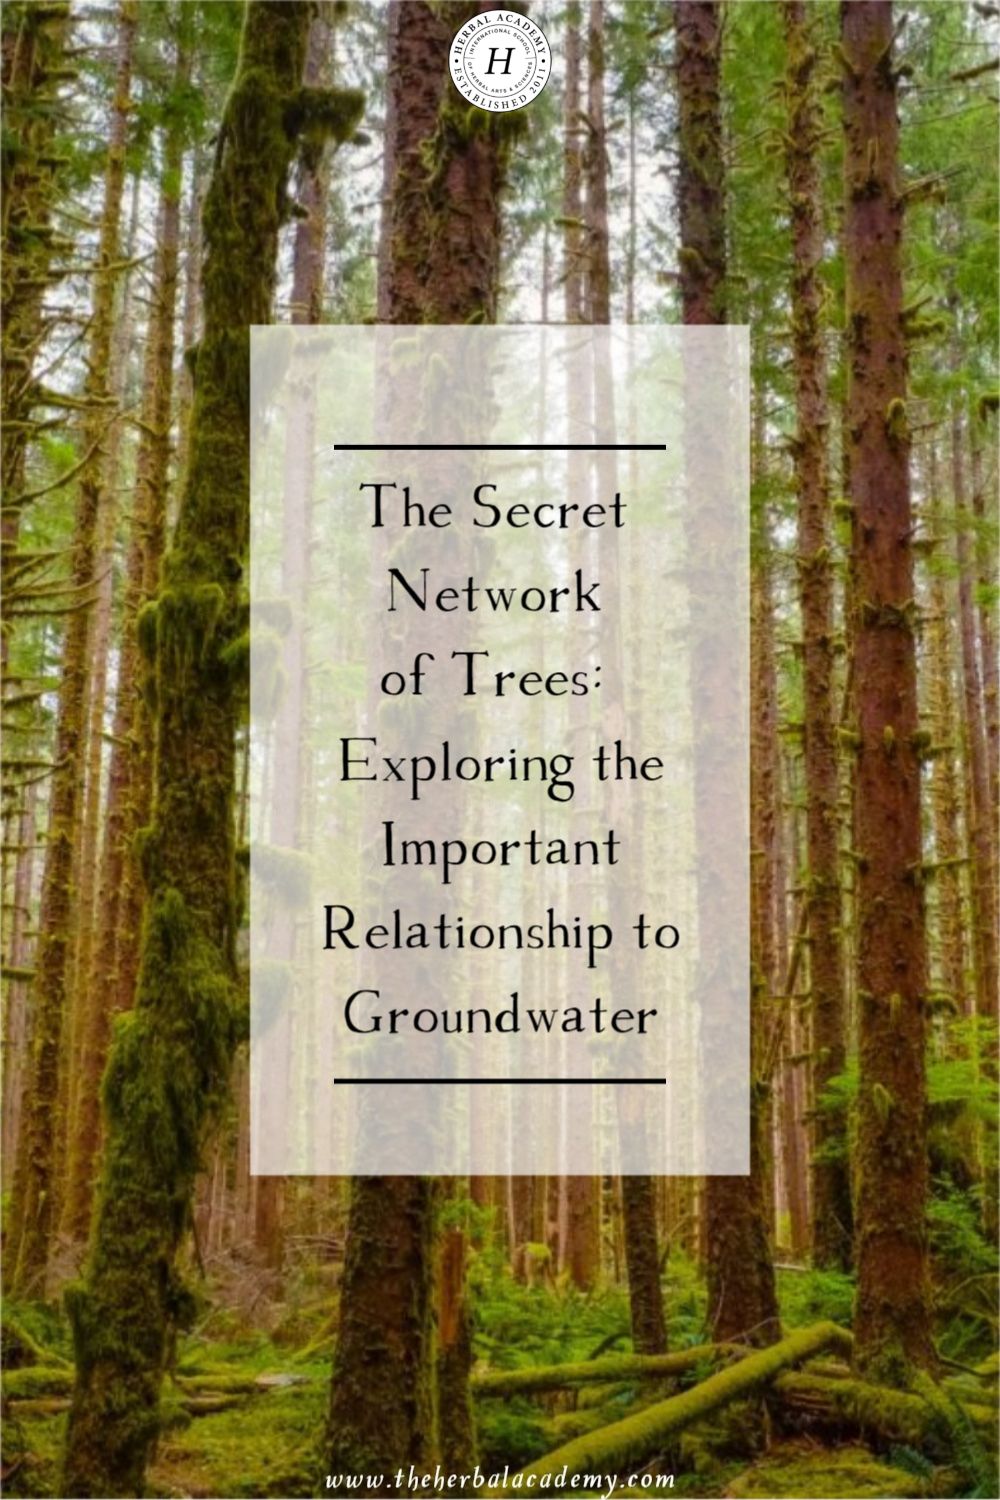 The Secret Network of Trees: Exploring the Important Relationship to Groundwater | Herbal Academy | Learn why forests are important for the groundwater in this excerpt from the book, The Secret Wisdom of Nature written by Peter Wohlleben.